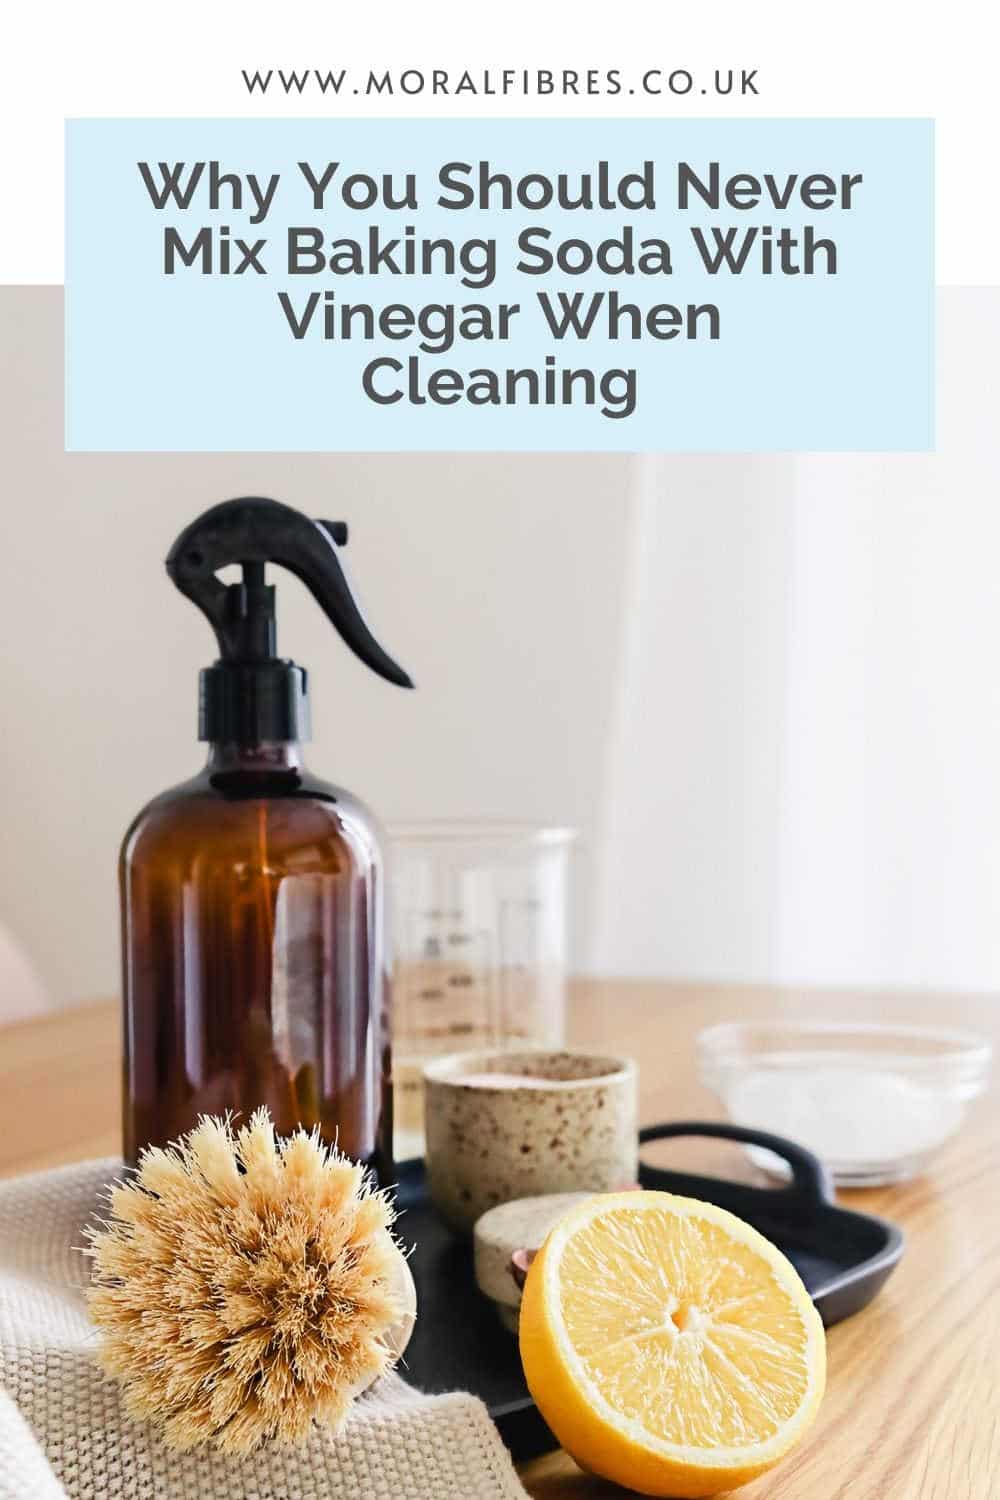 Natural cleaning products with a blue text box that says why you should never mix baking soda (bicarbonate of soda) with vinegar when cleaning